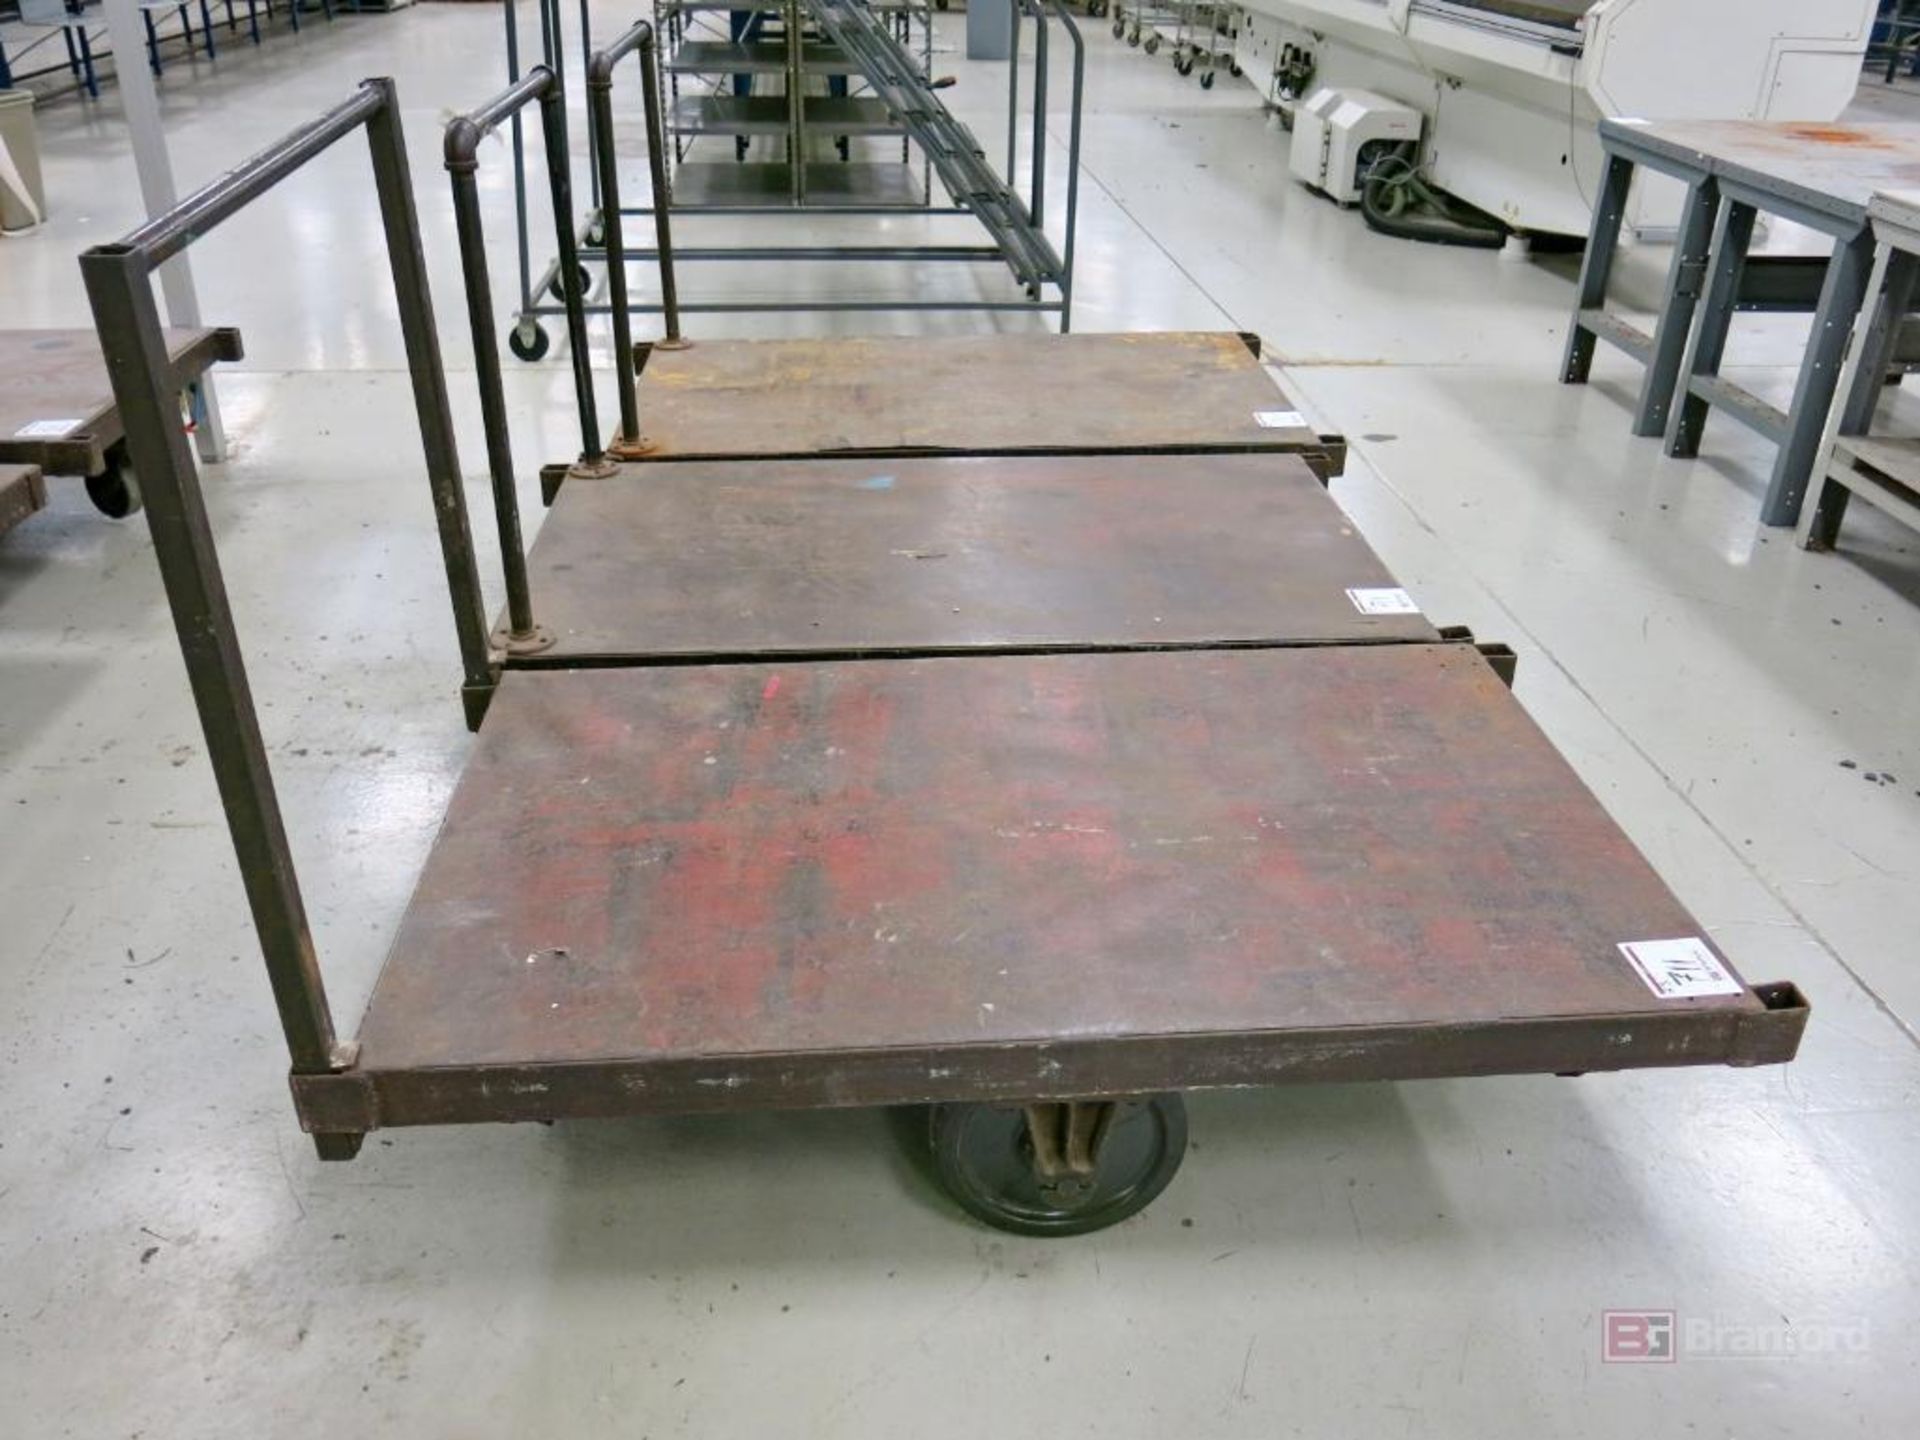 Lot of 60" x 36" Flatbed Heavy Duty Carts - Image 2 of 2